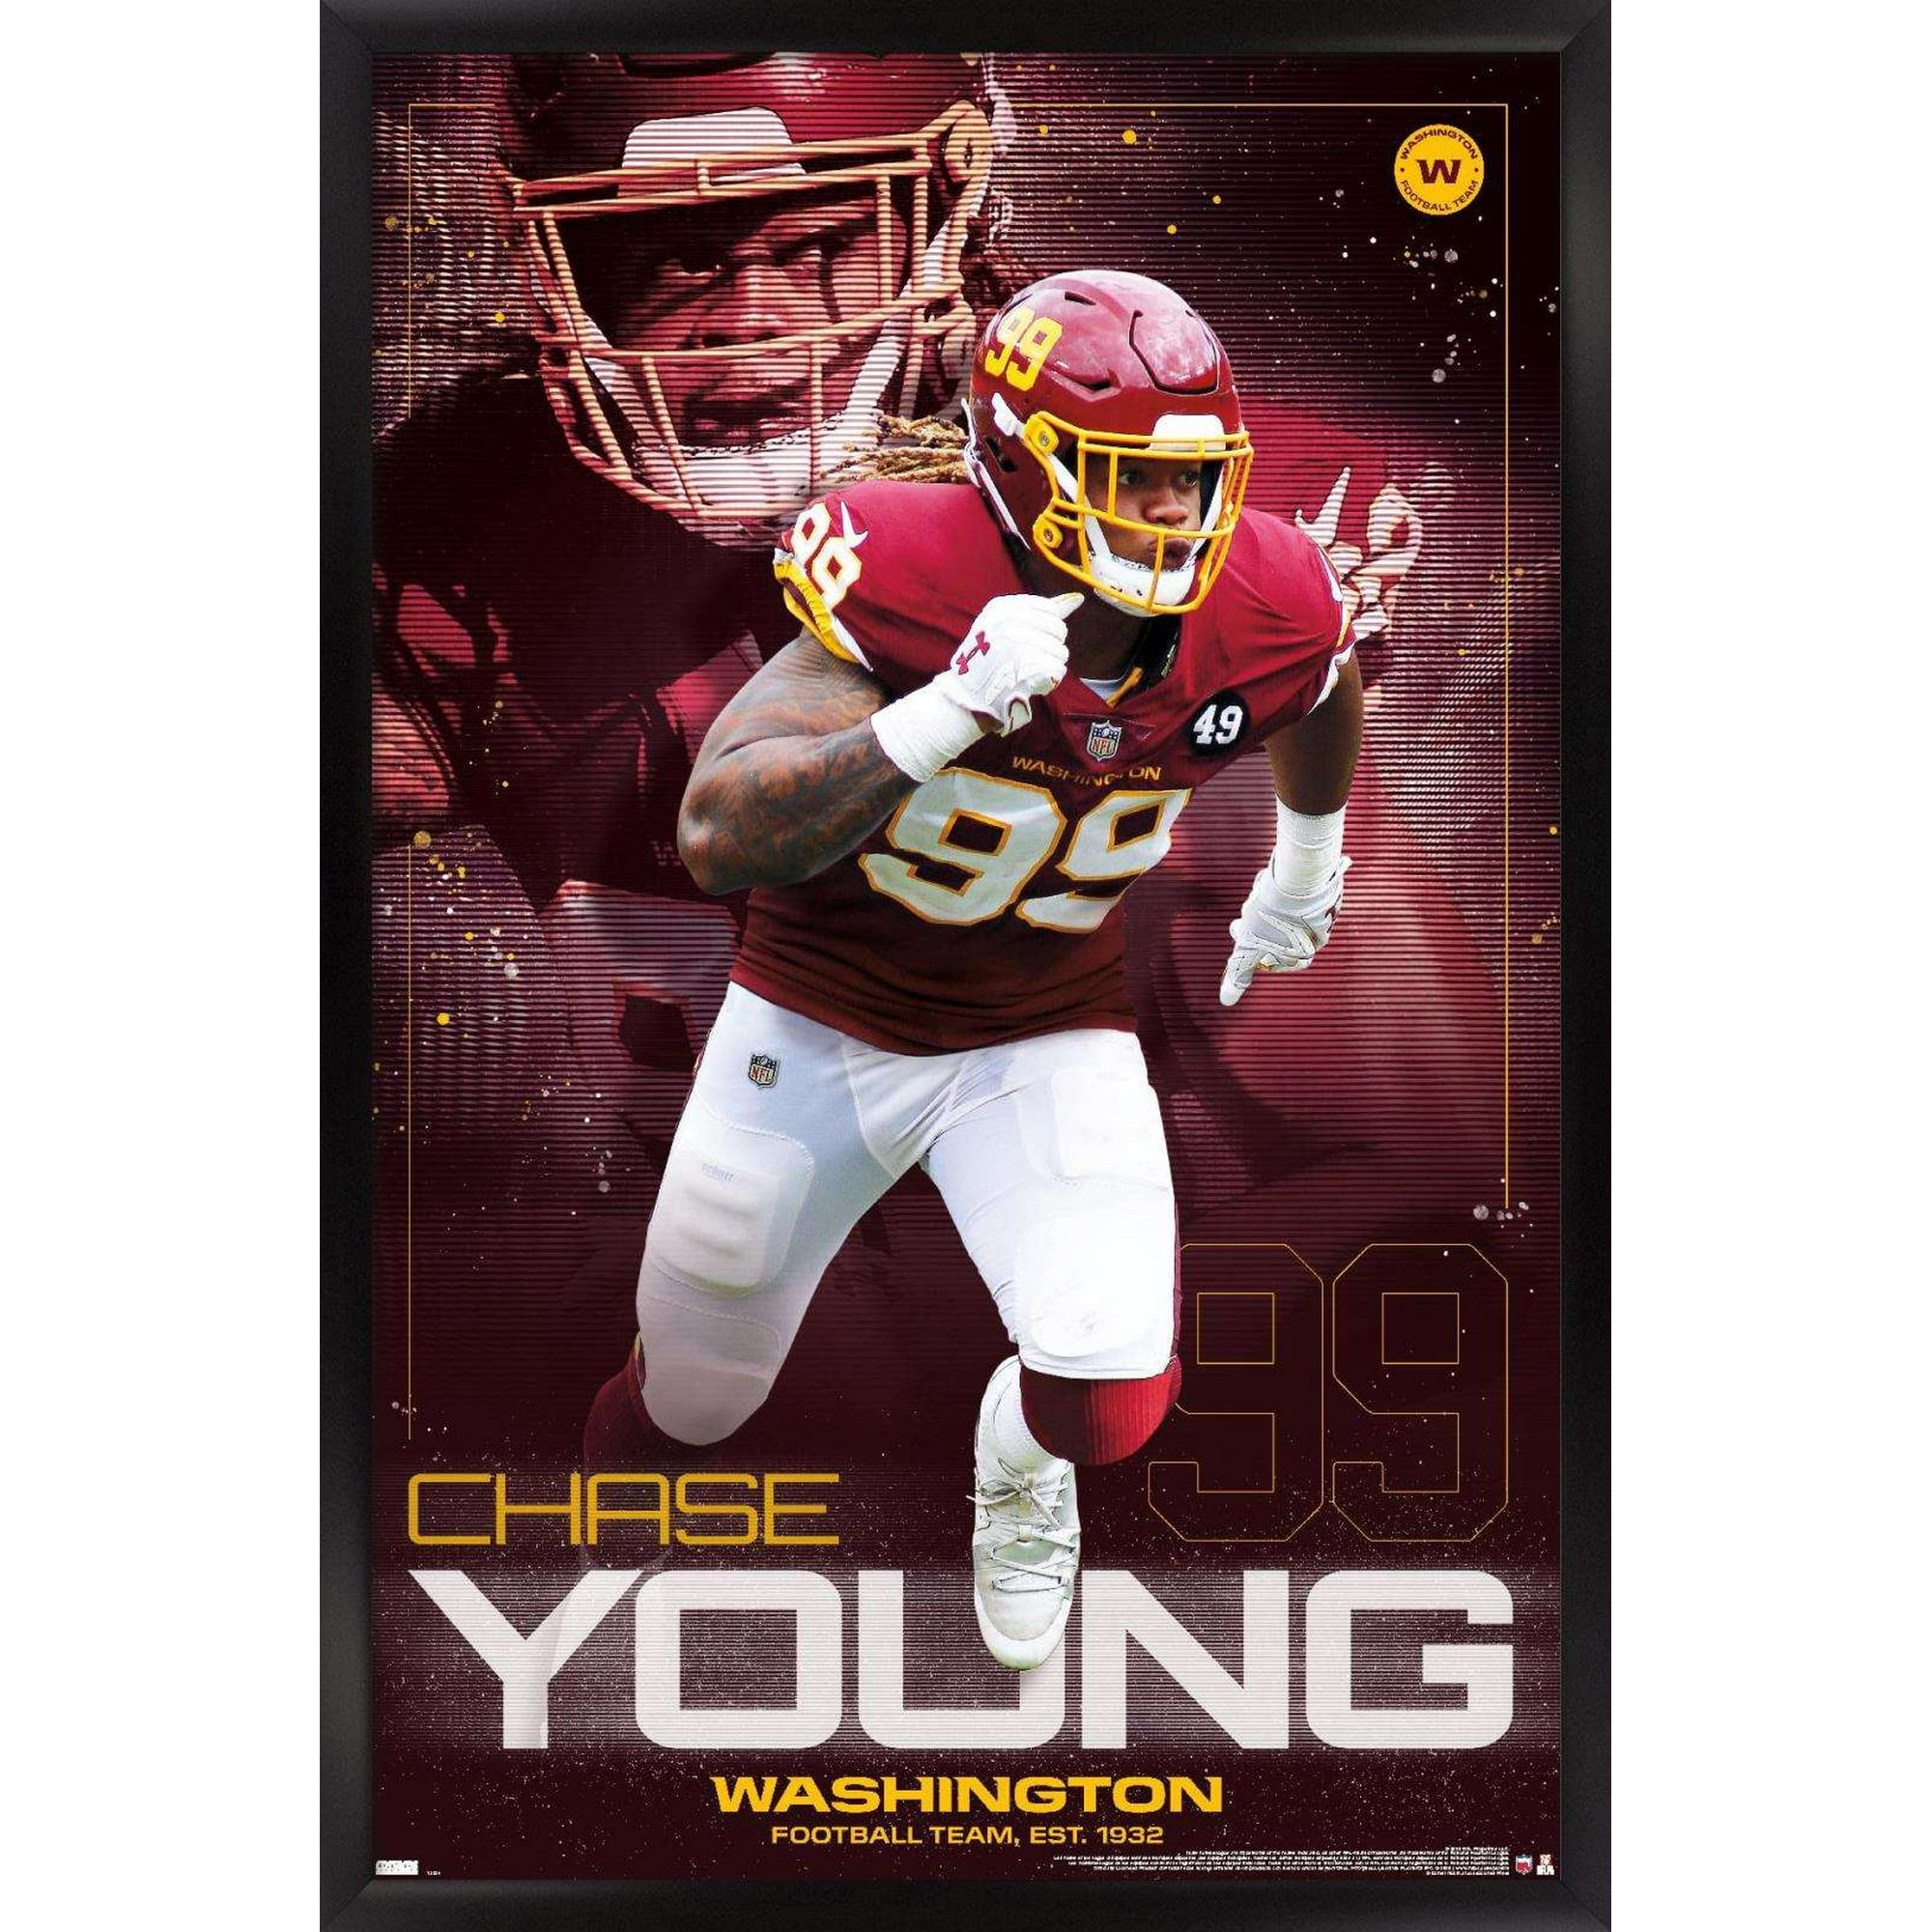 NFL Washington Football Team - Chase Young 20 Wall Poster, 22.375' x 34',  Framed